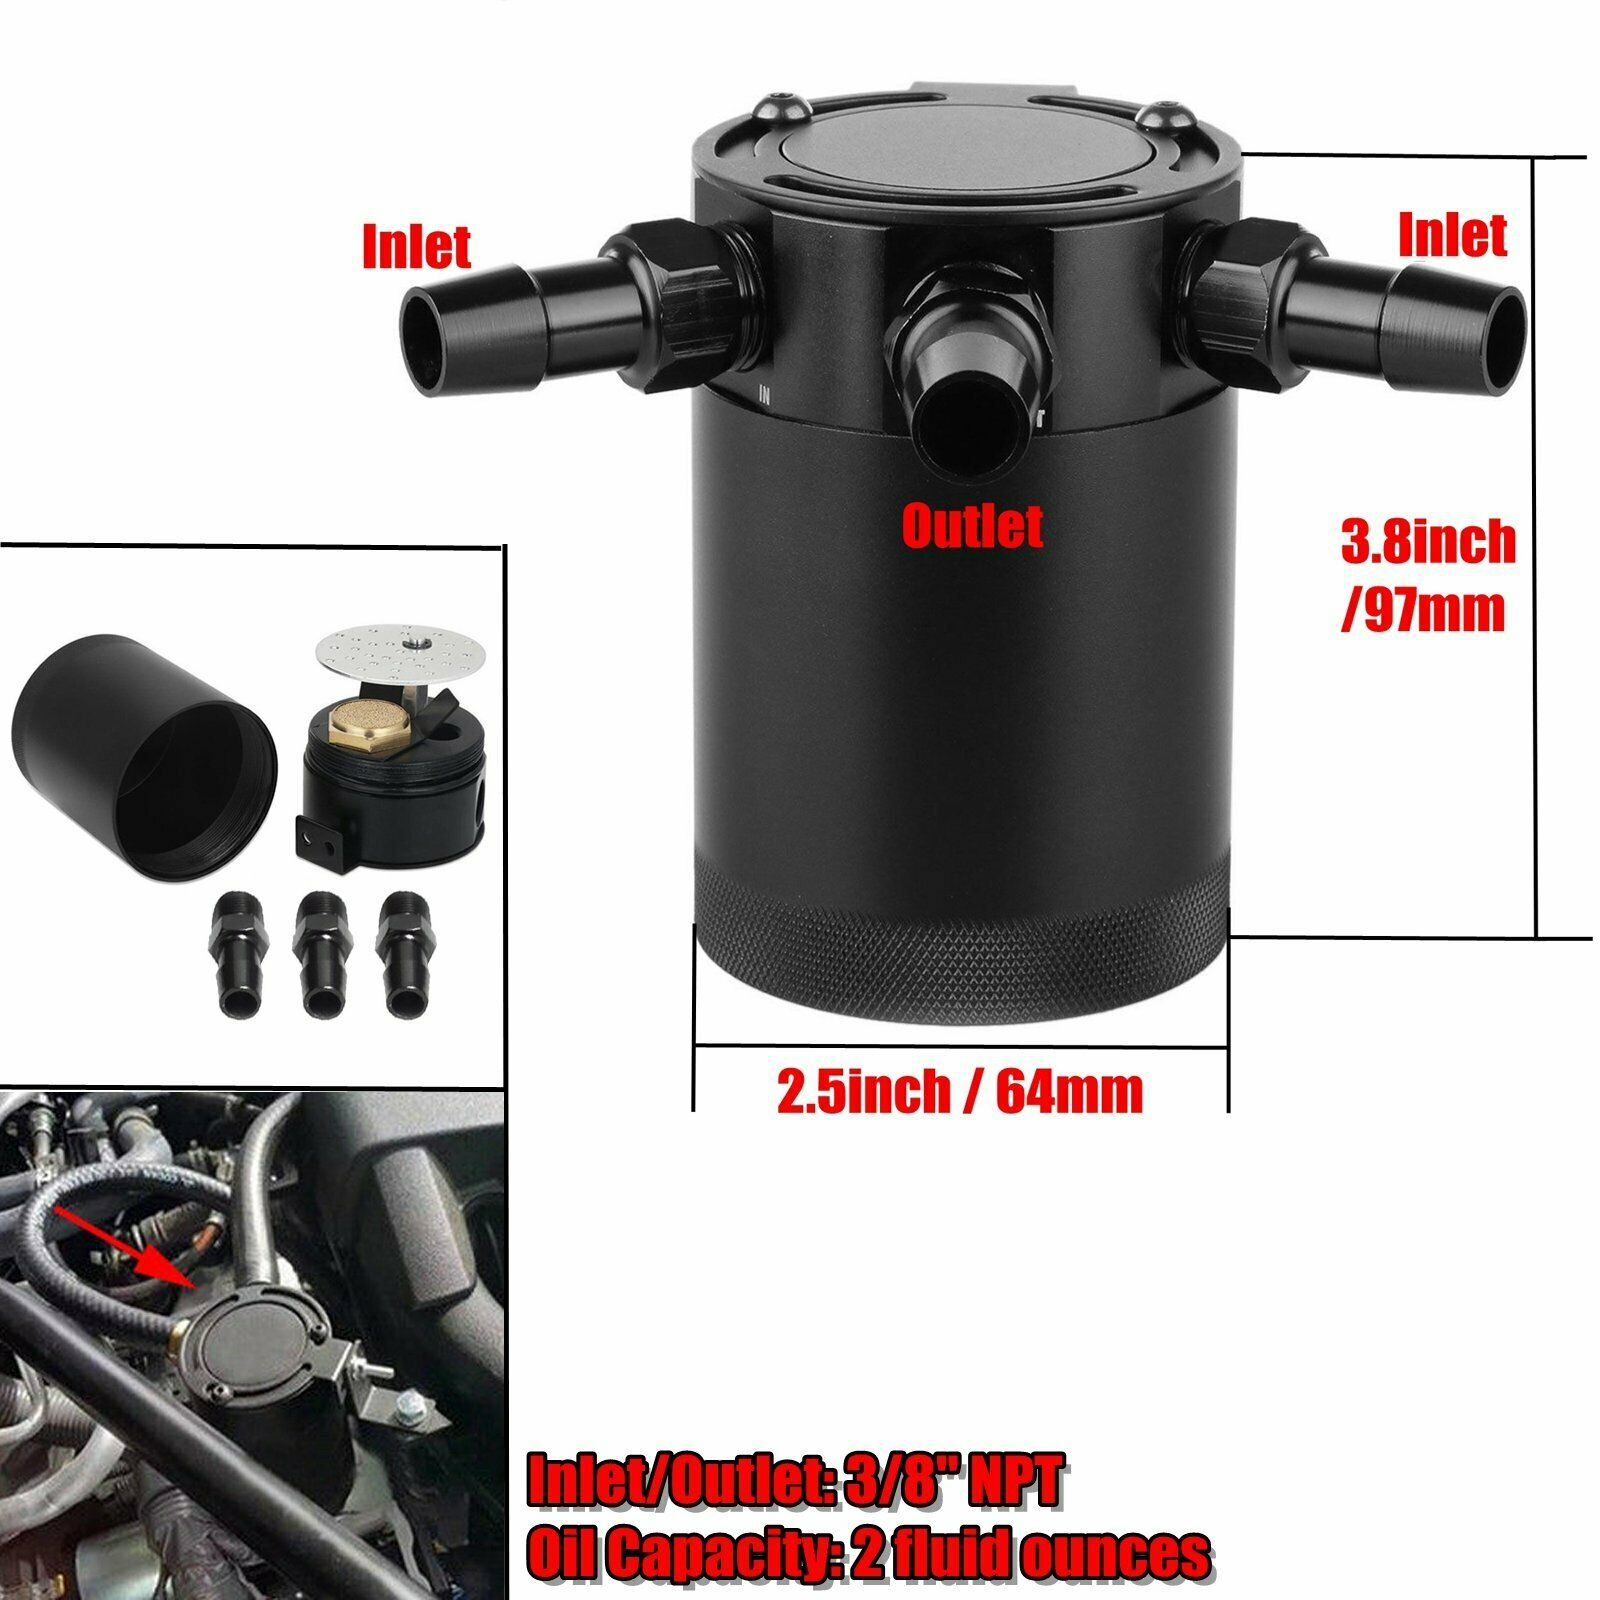  Sporacingrts 3 Port Oil Catch Can, 1 oulet + 2 intlet Compact  Baffled Engine Oil Reservoir Tank with Breather Filter + Drain Valve :  Automotive